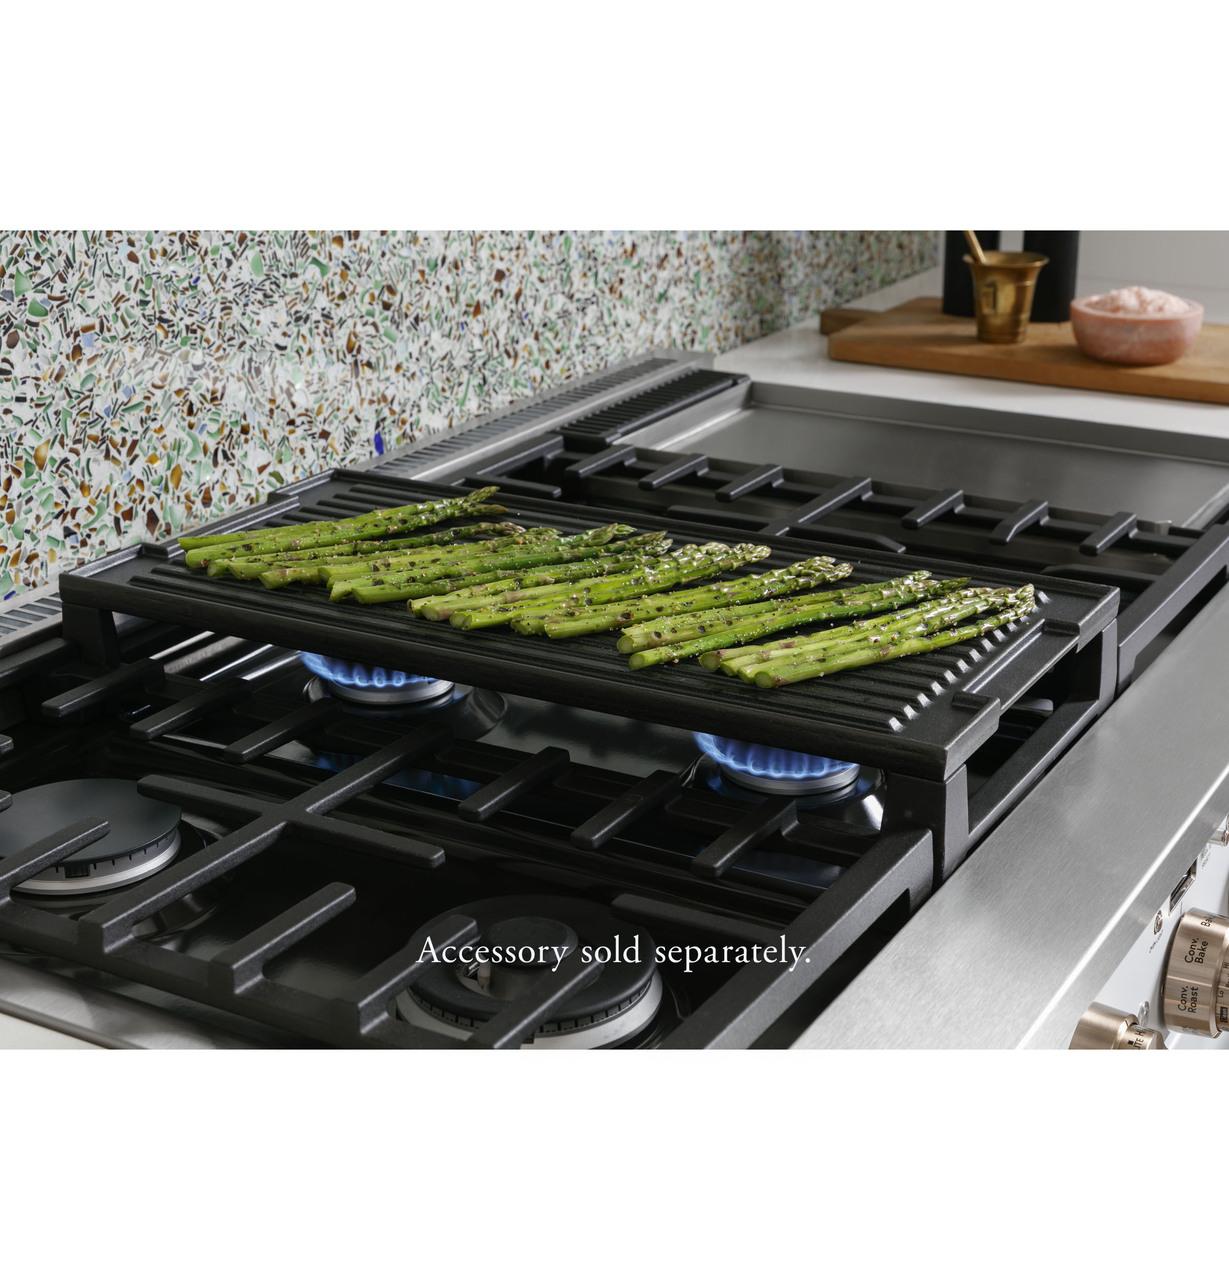 Cafe Caf(eback)™ 36" Smart Dual-Fuel Commercial-Style Range with 6 Burners (Natural Gas)